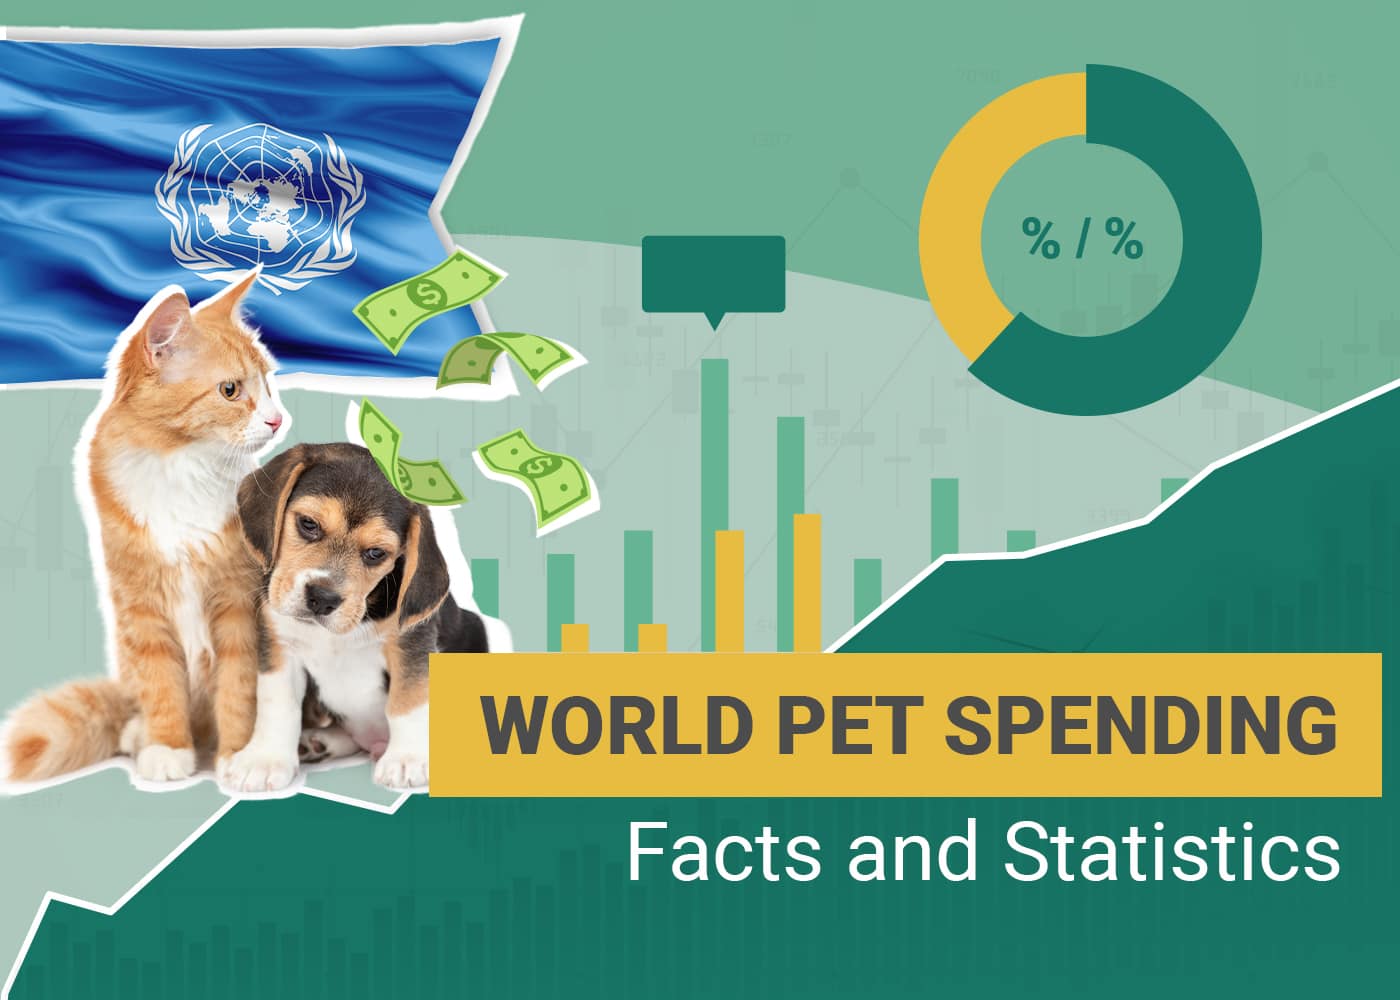 World Pet Spending Facts and Statistics